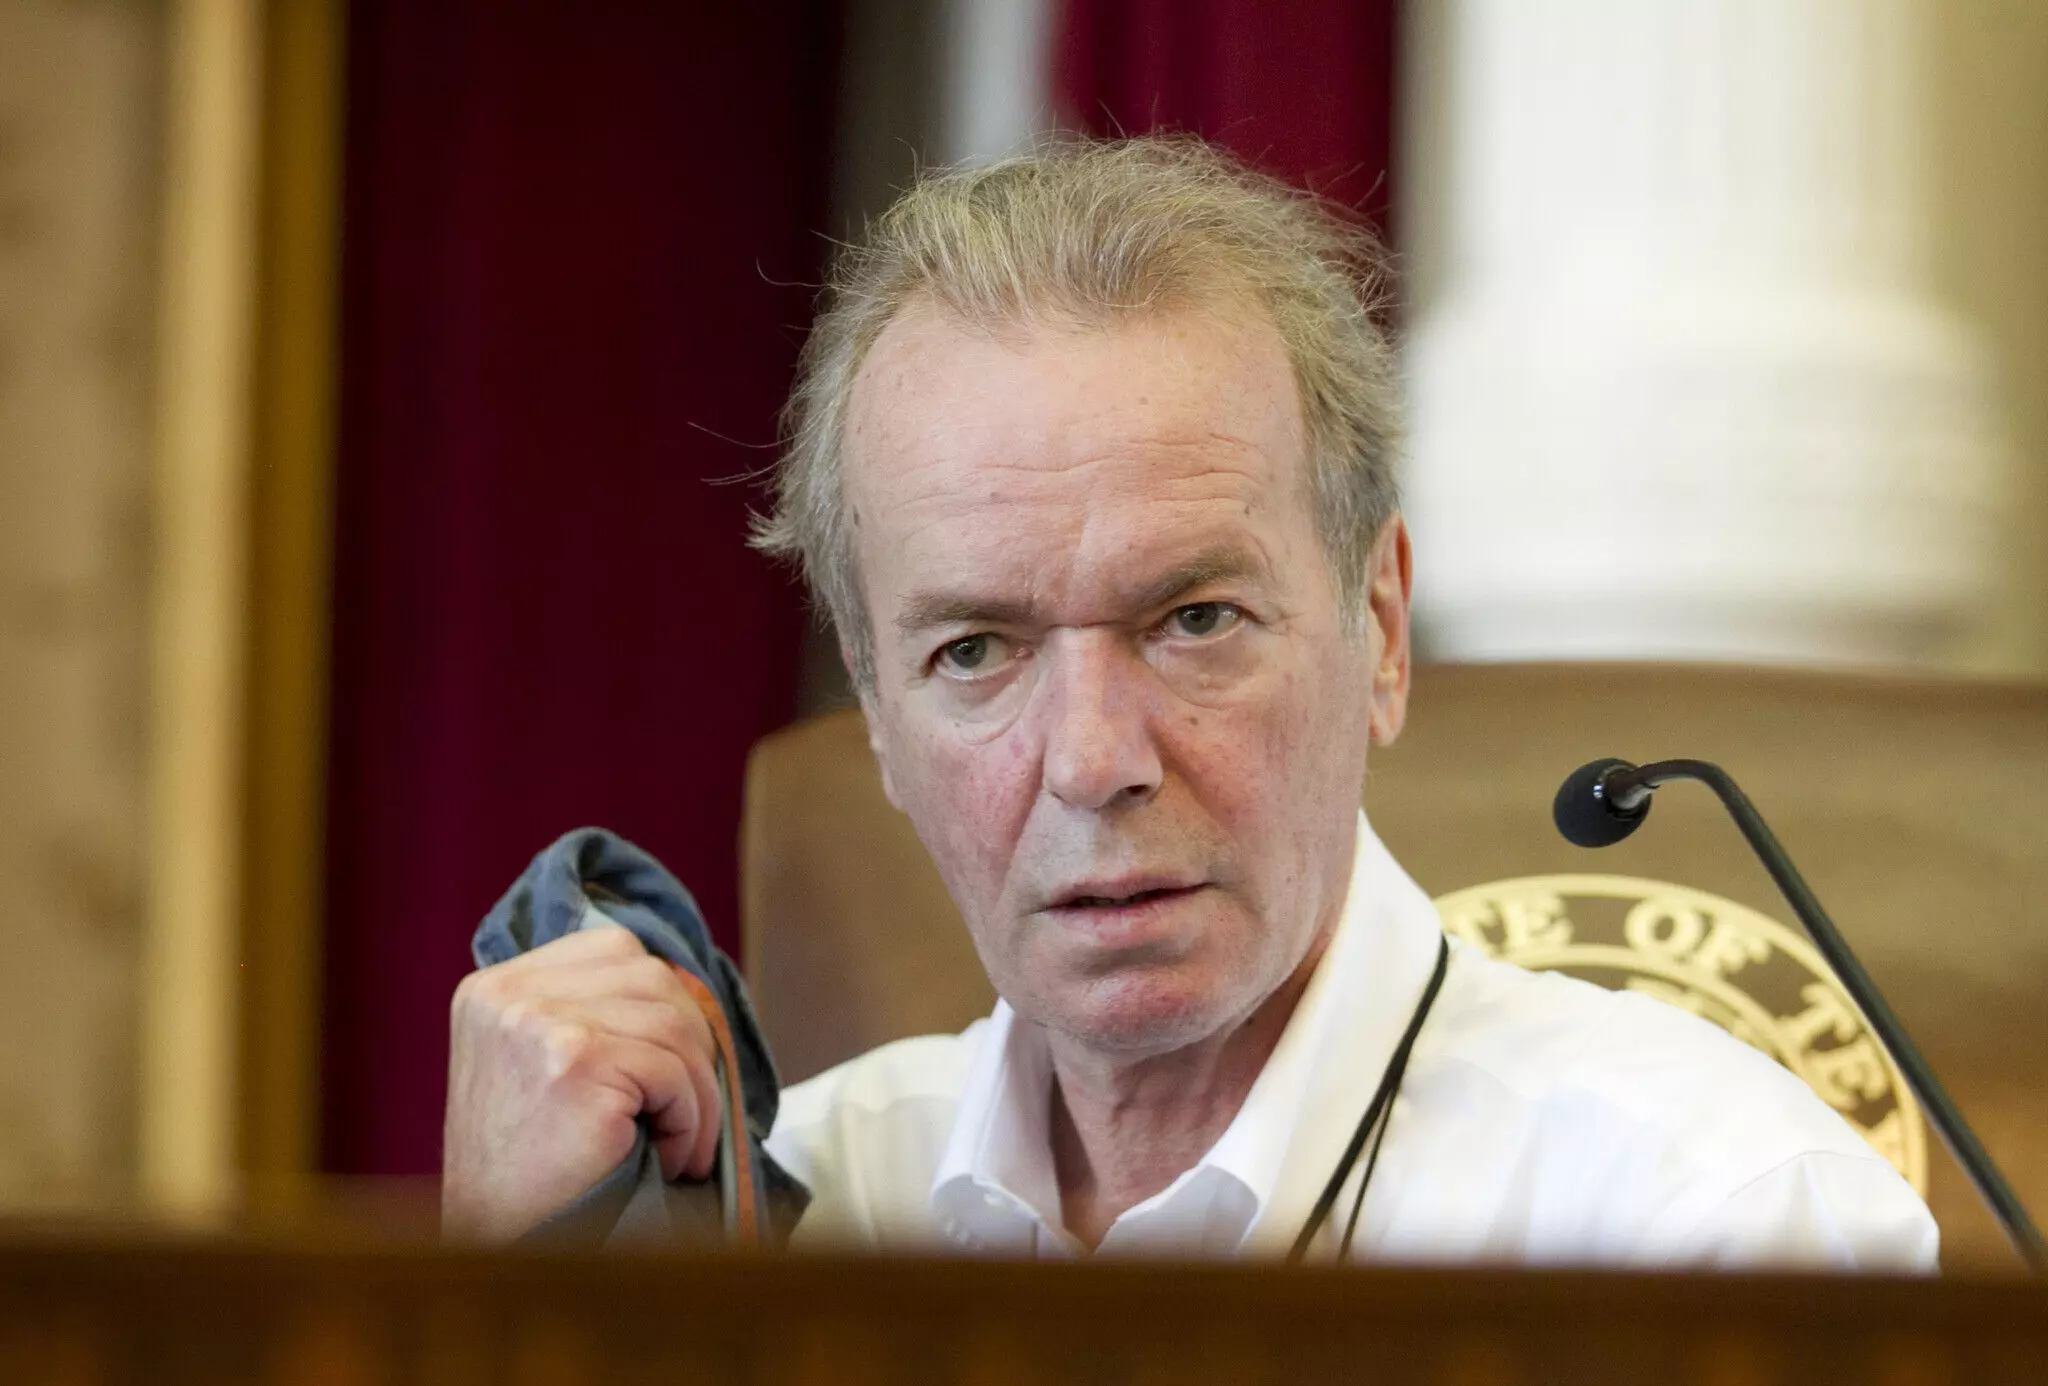 Martin Amis, British author of trend-setting novels including ‘Money’ dies